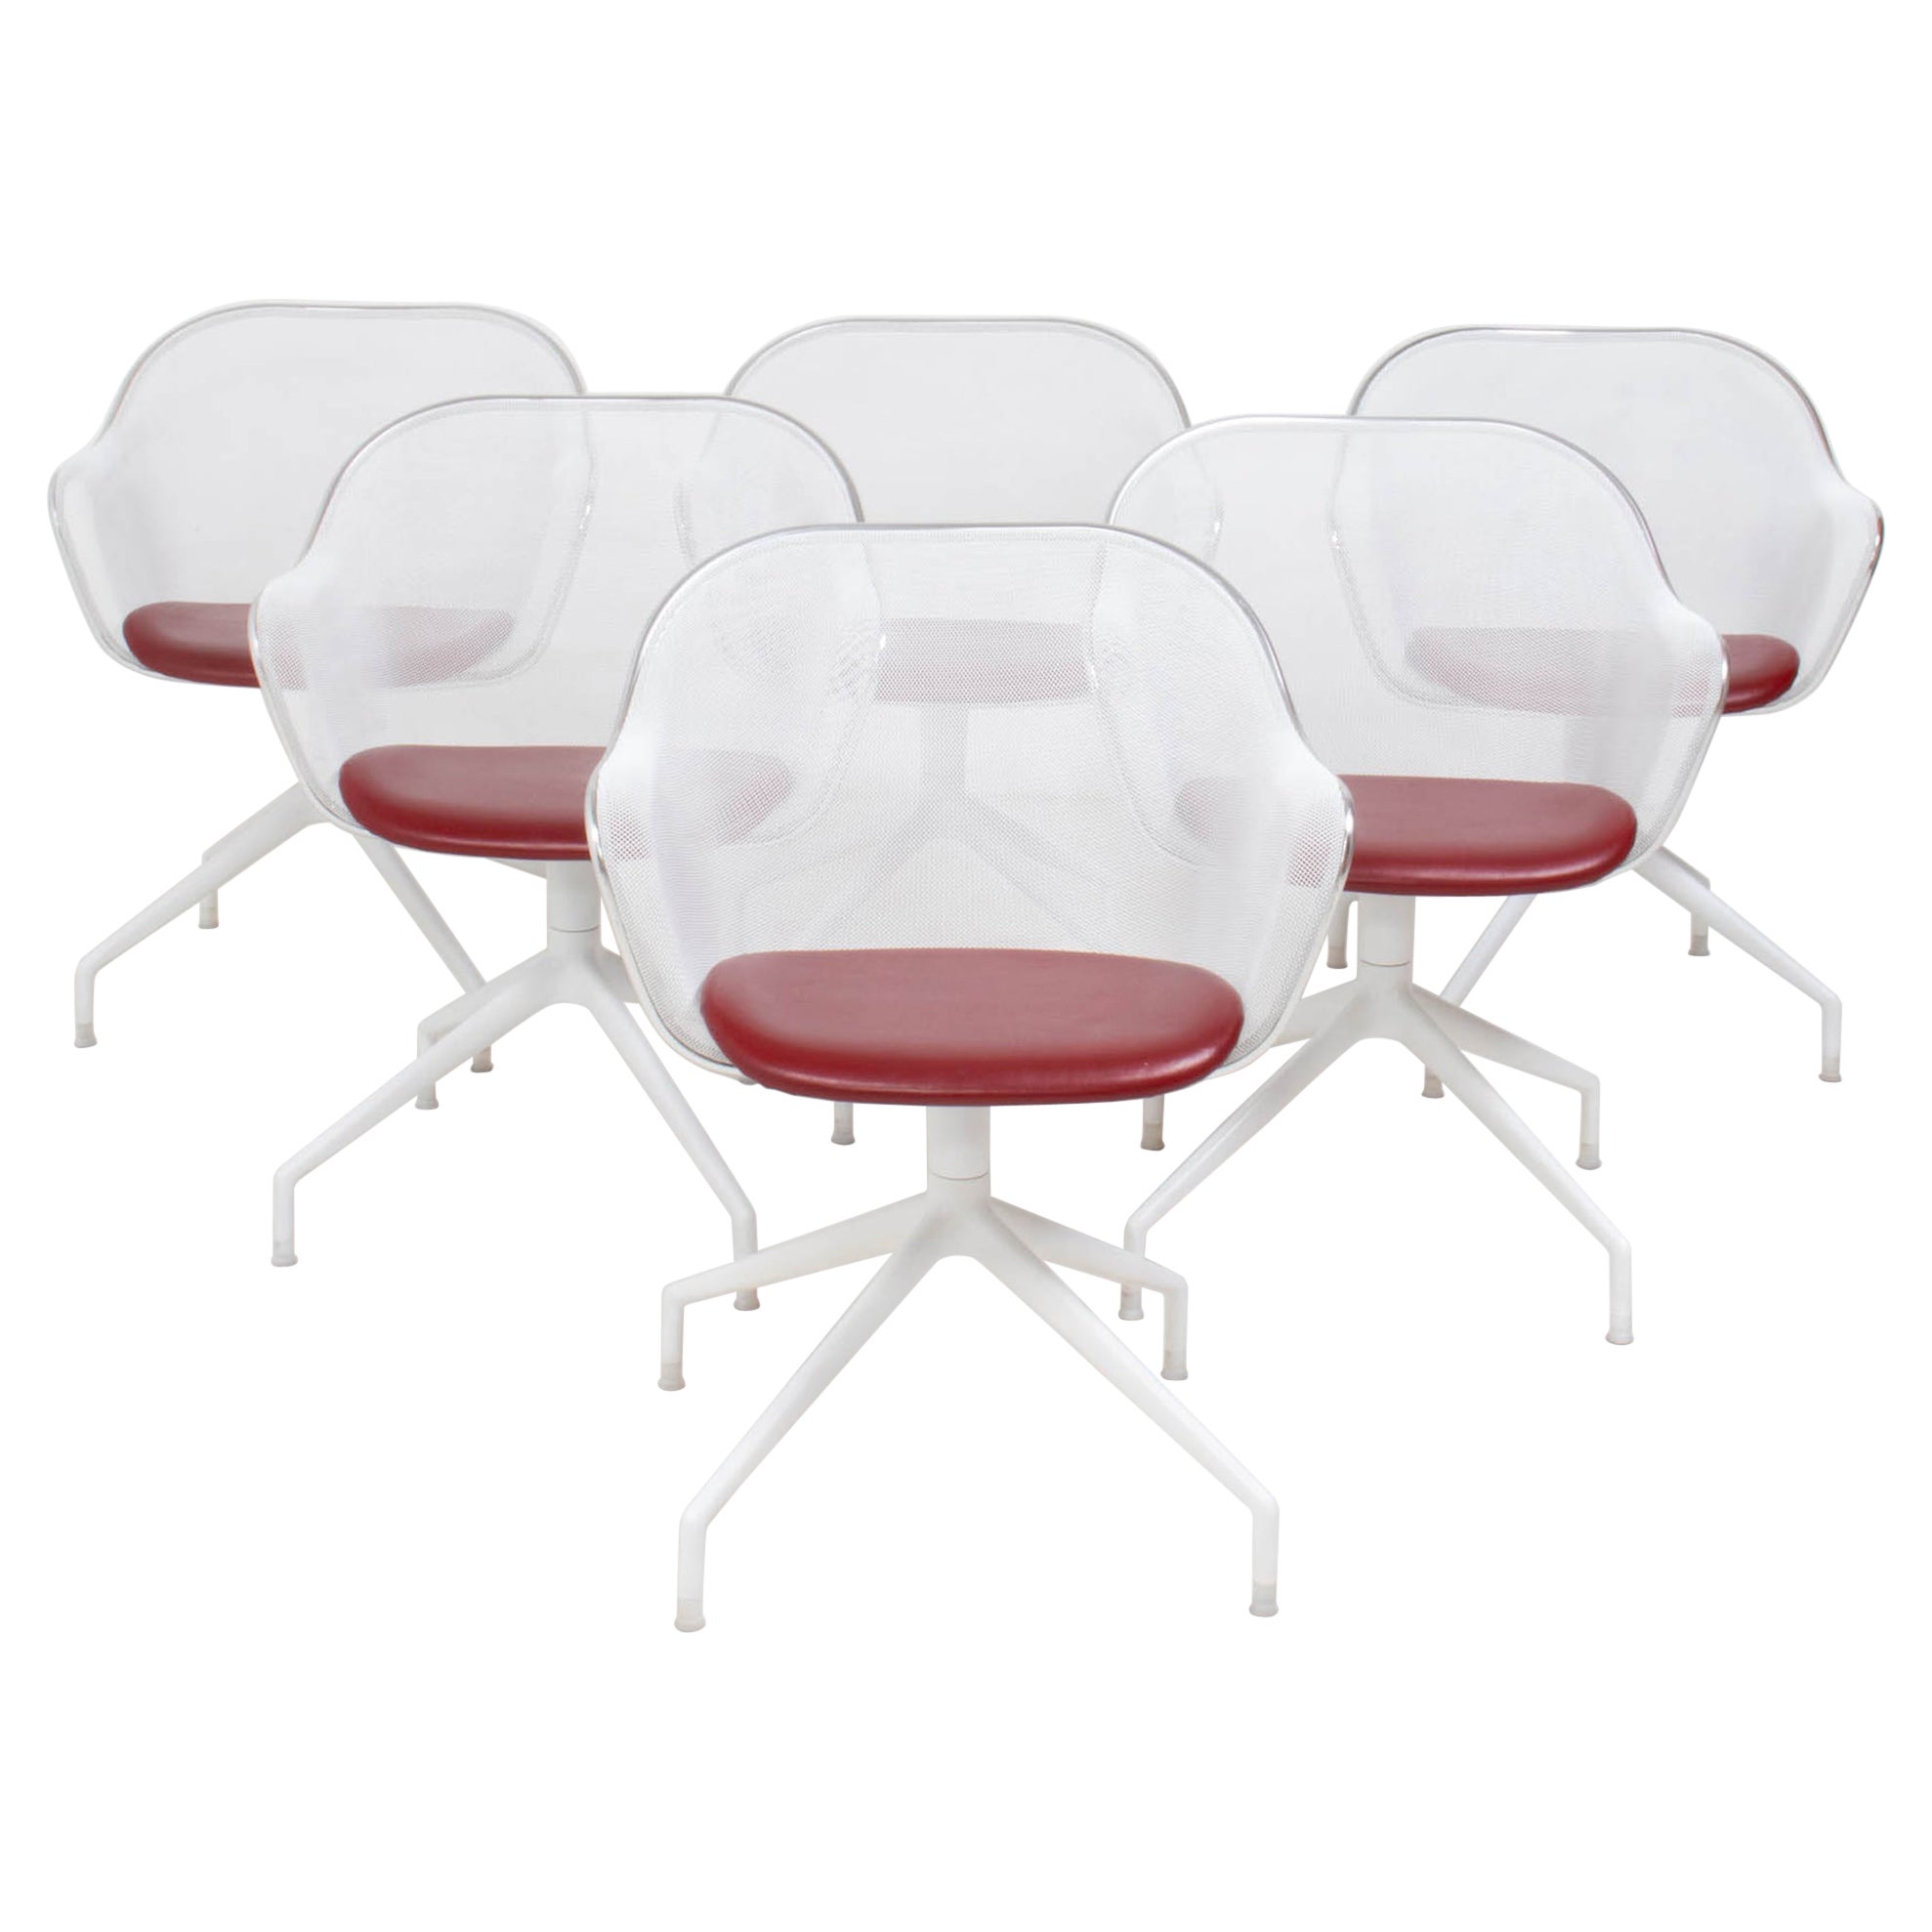 B&B Italia by Antonio Citterio Luta White and Red Leather Swivel Dining Chairs